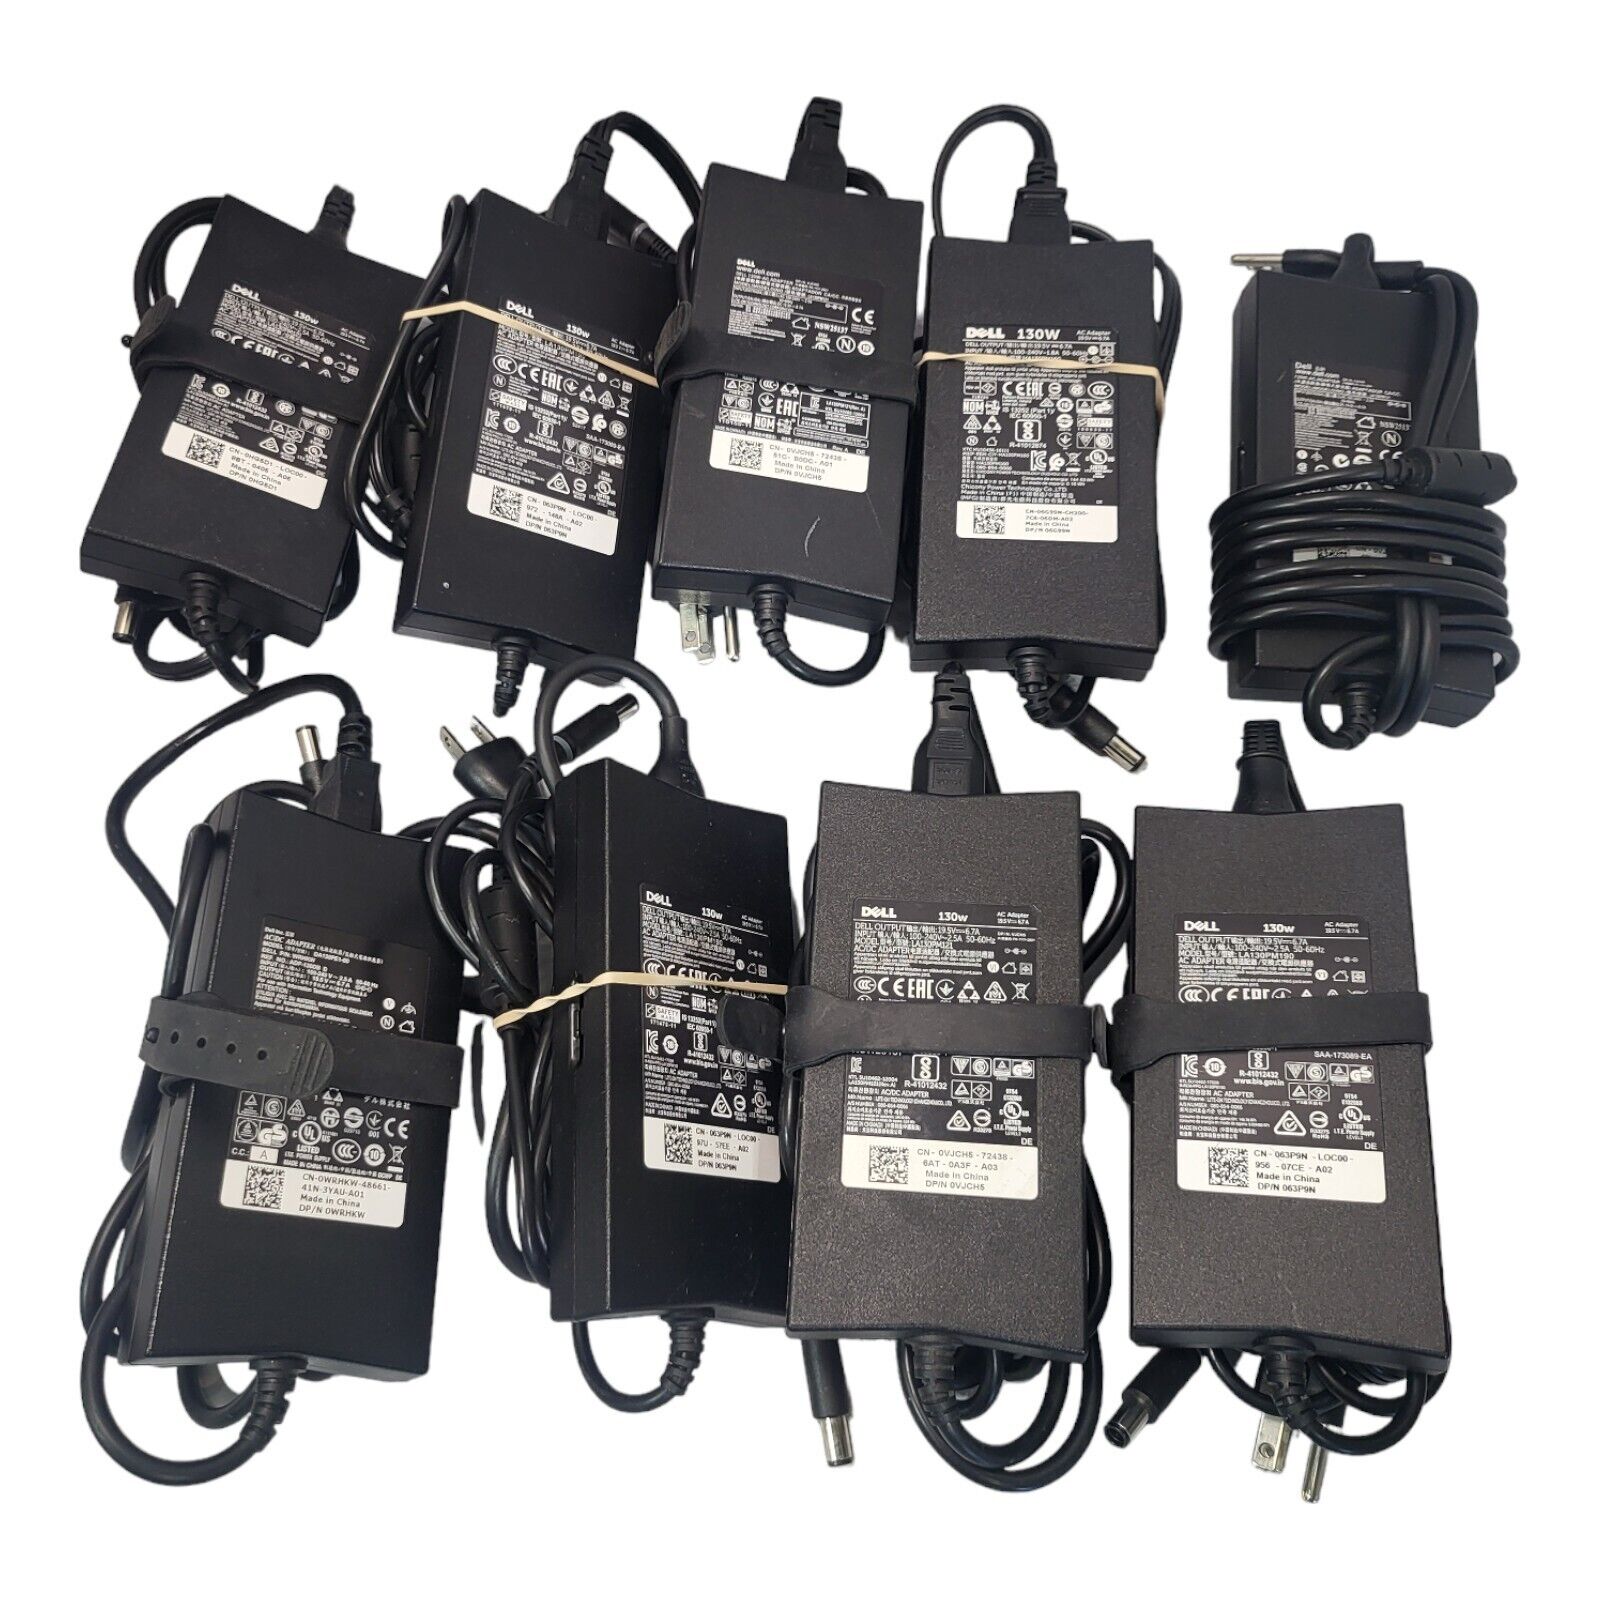 Lot of 9 - Original Genuine OEM Dell 130 Watts Laptop AC Adapter Charger 130W